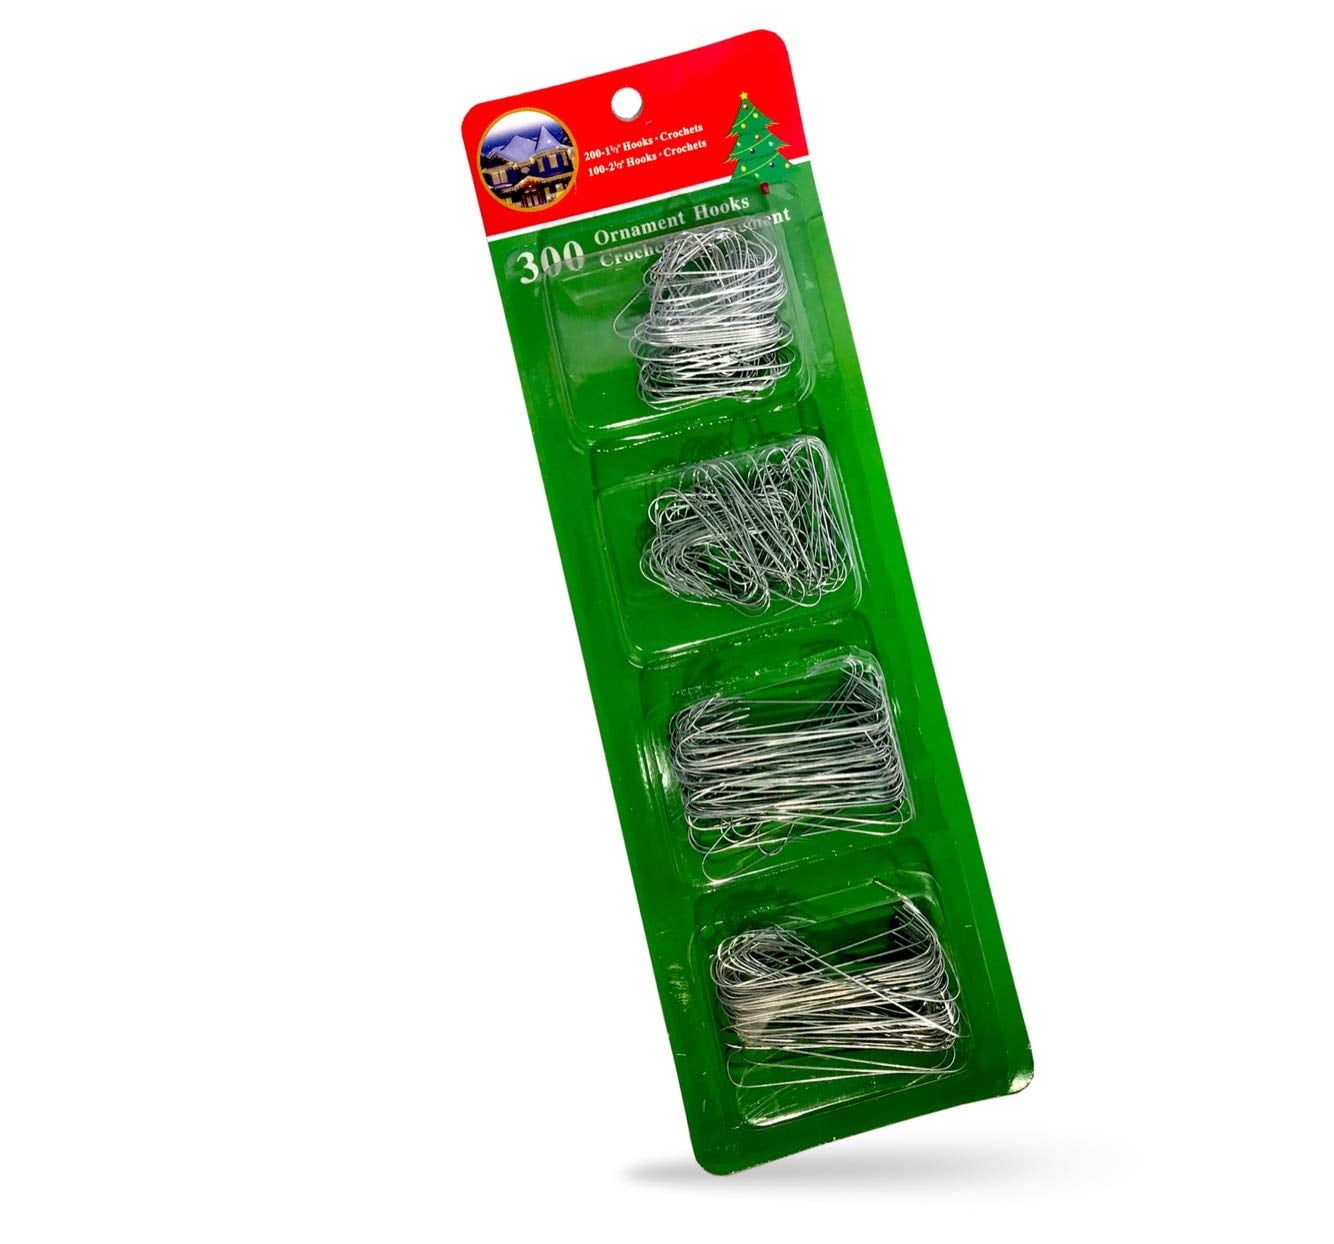 2 Sizes Silver Tree Ornament Hooks 300 Count 